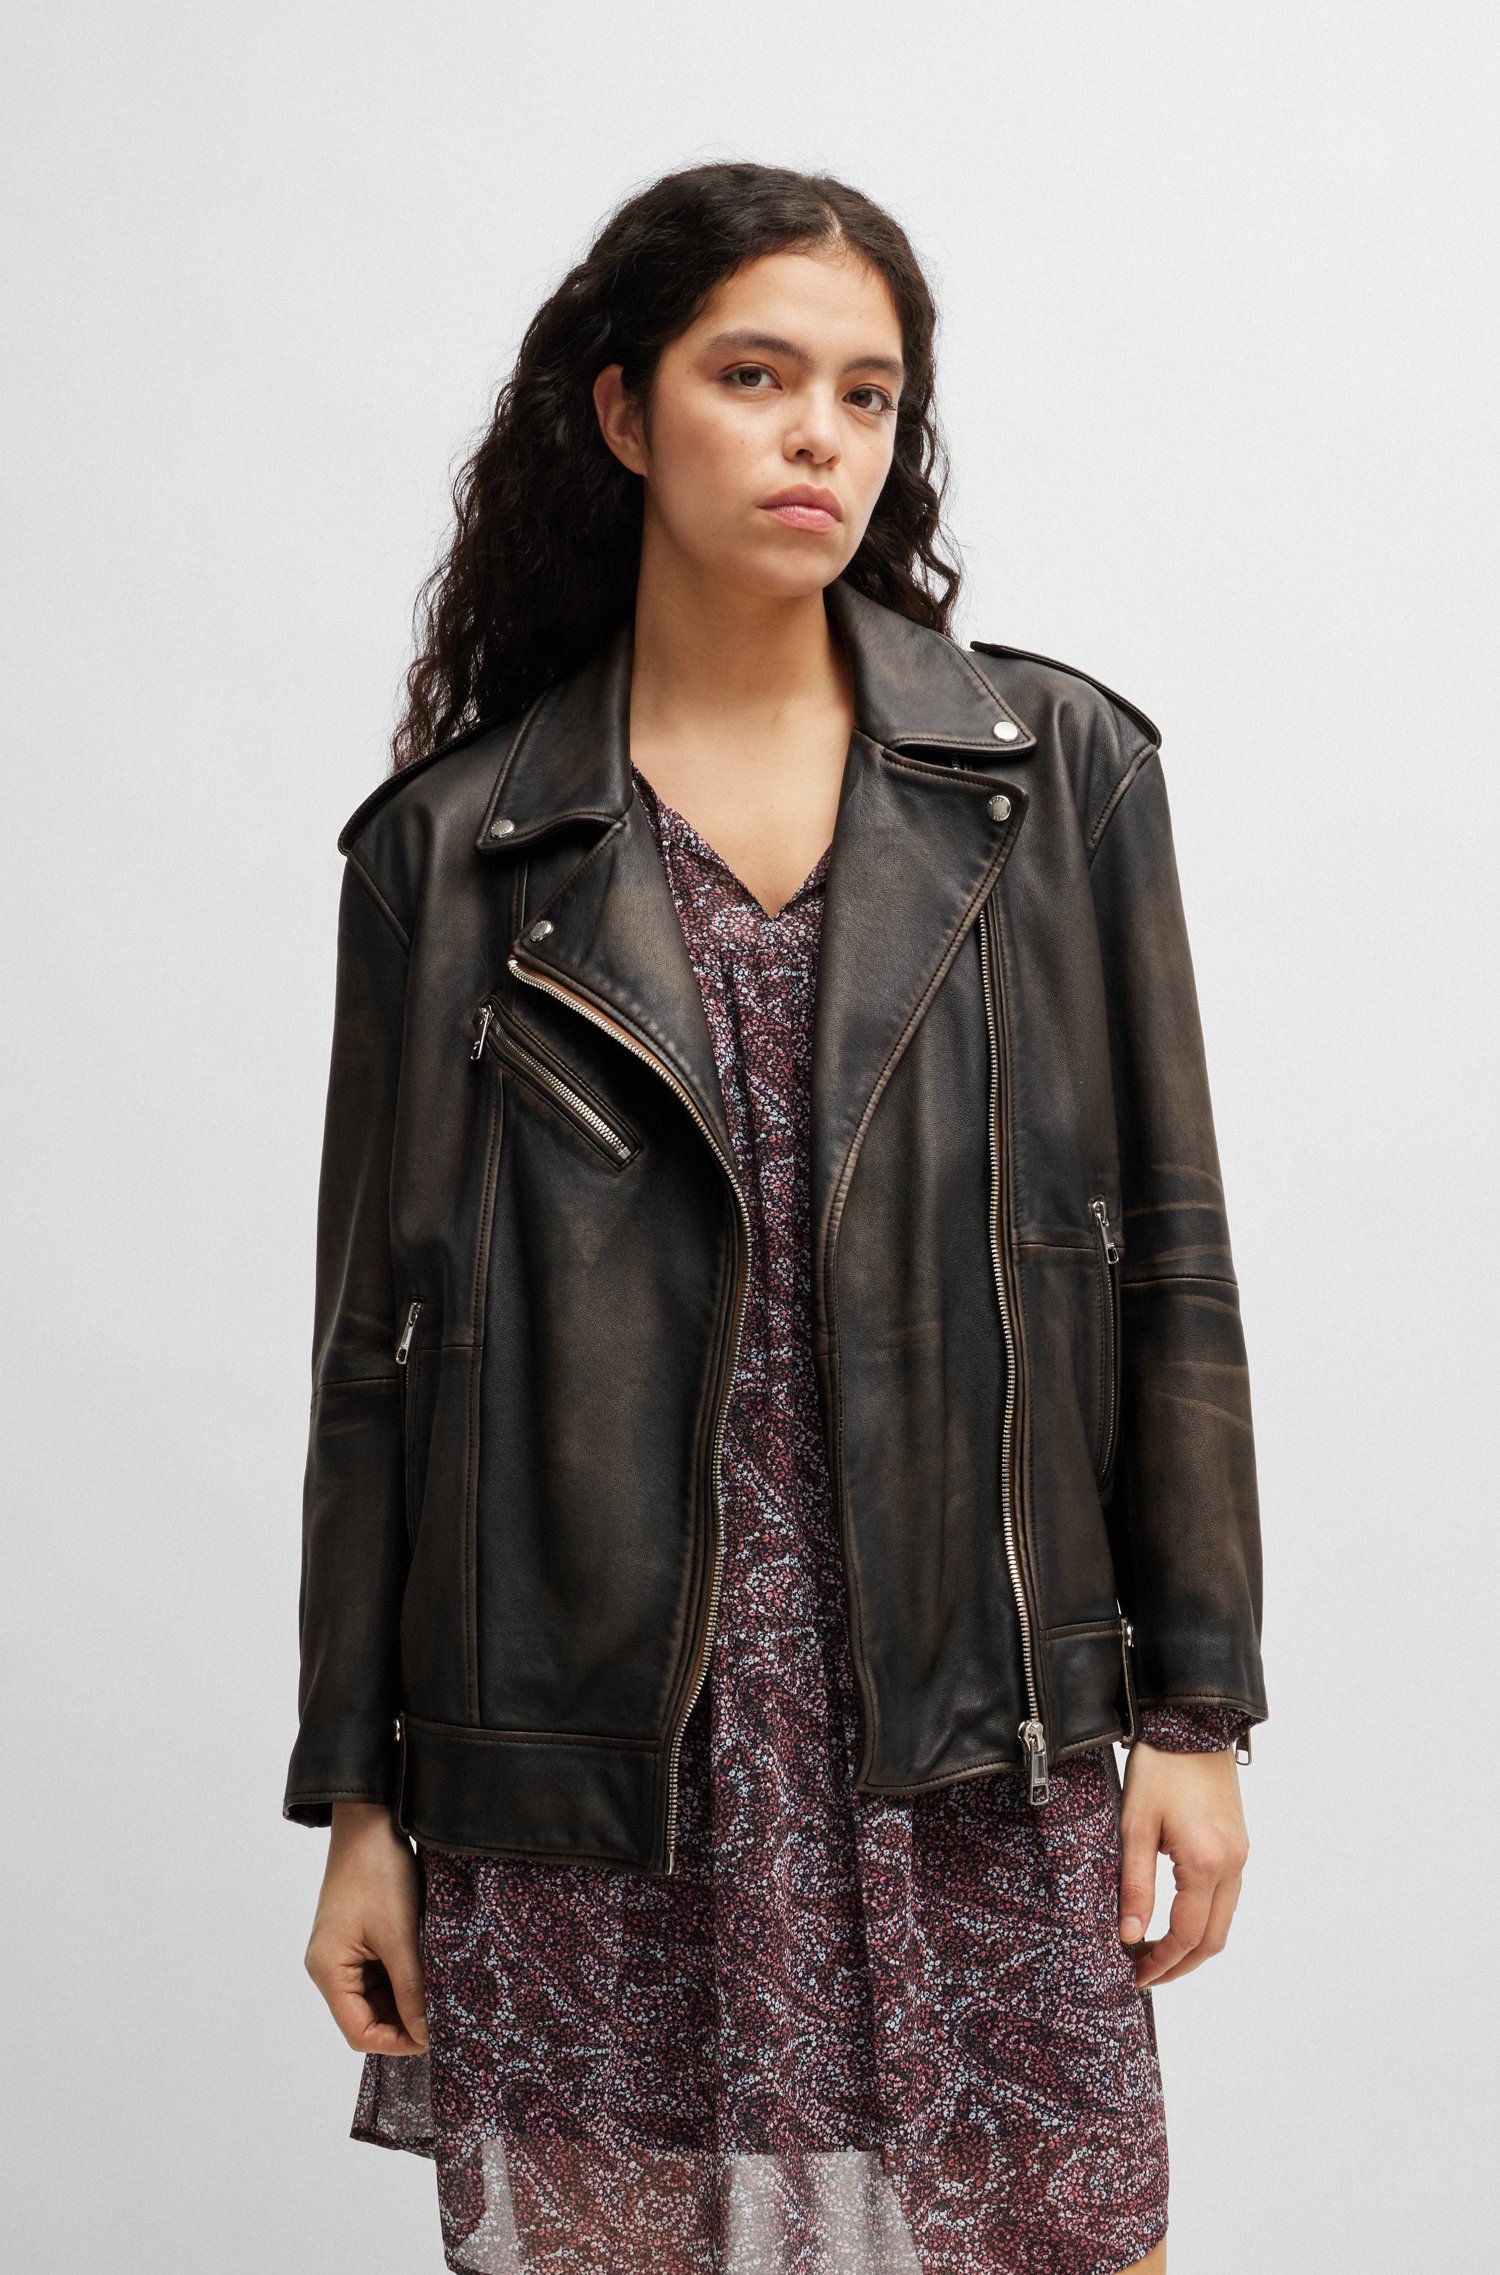 Zip-up leather jacket with signature lining